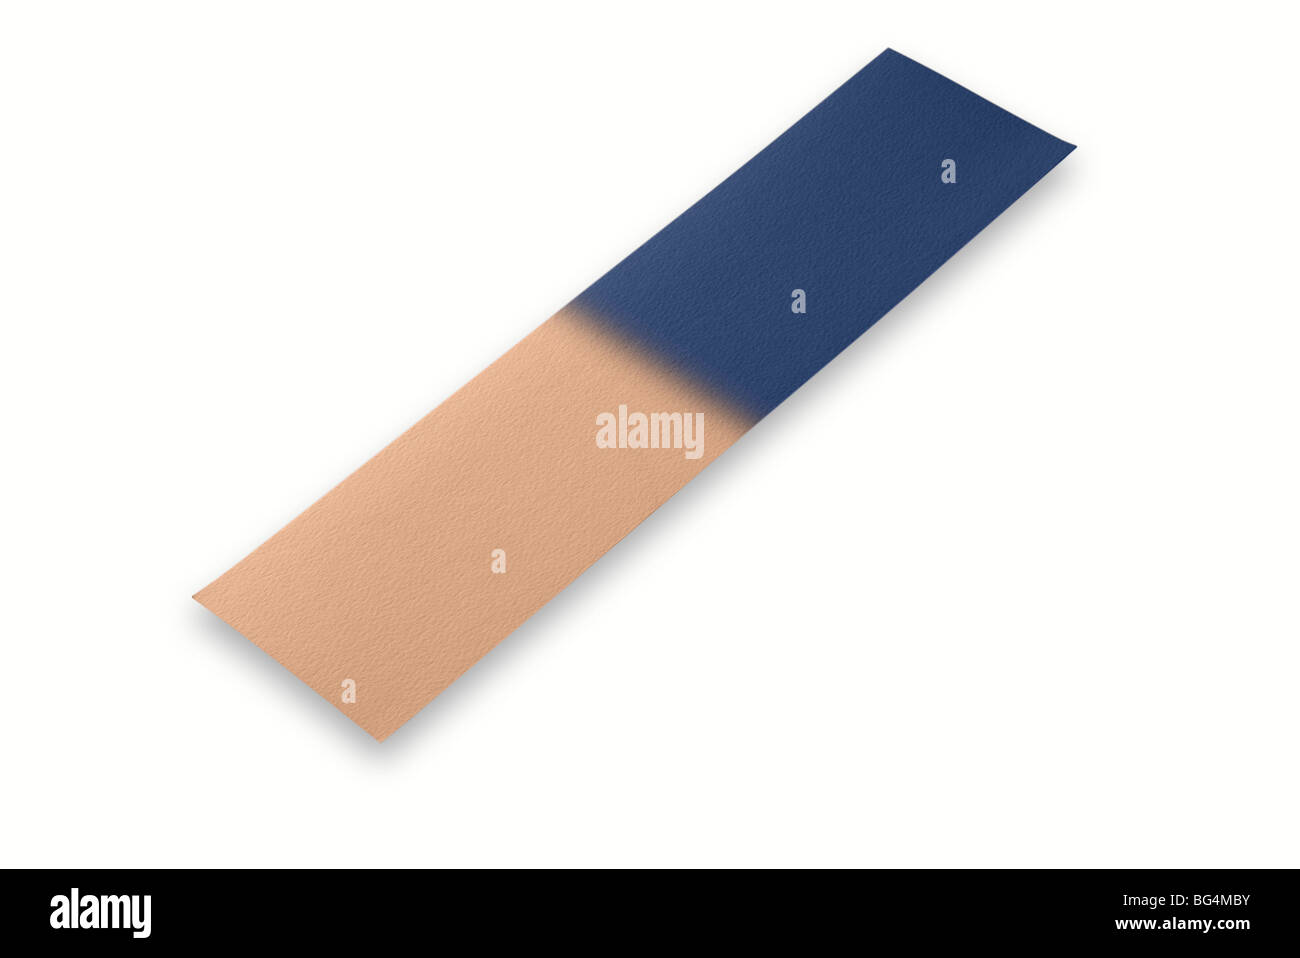 Blue and Pink Litmus Paper Stock Photo